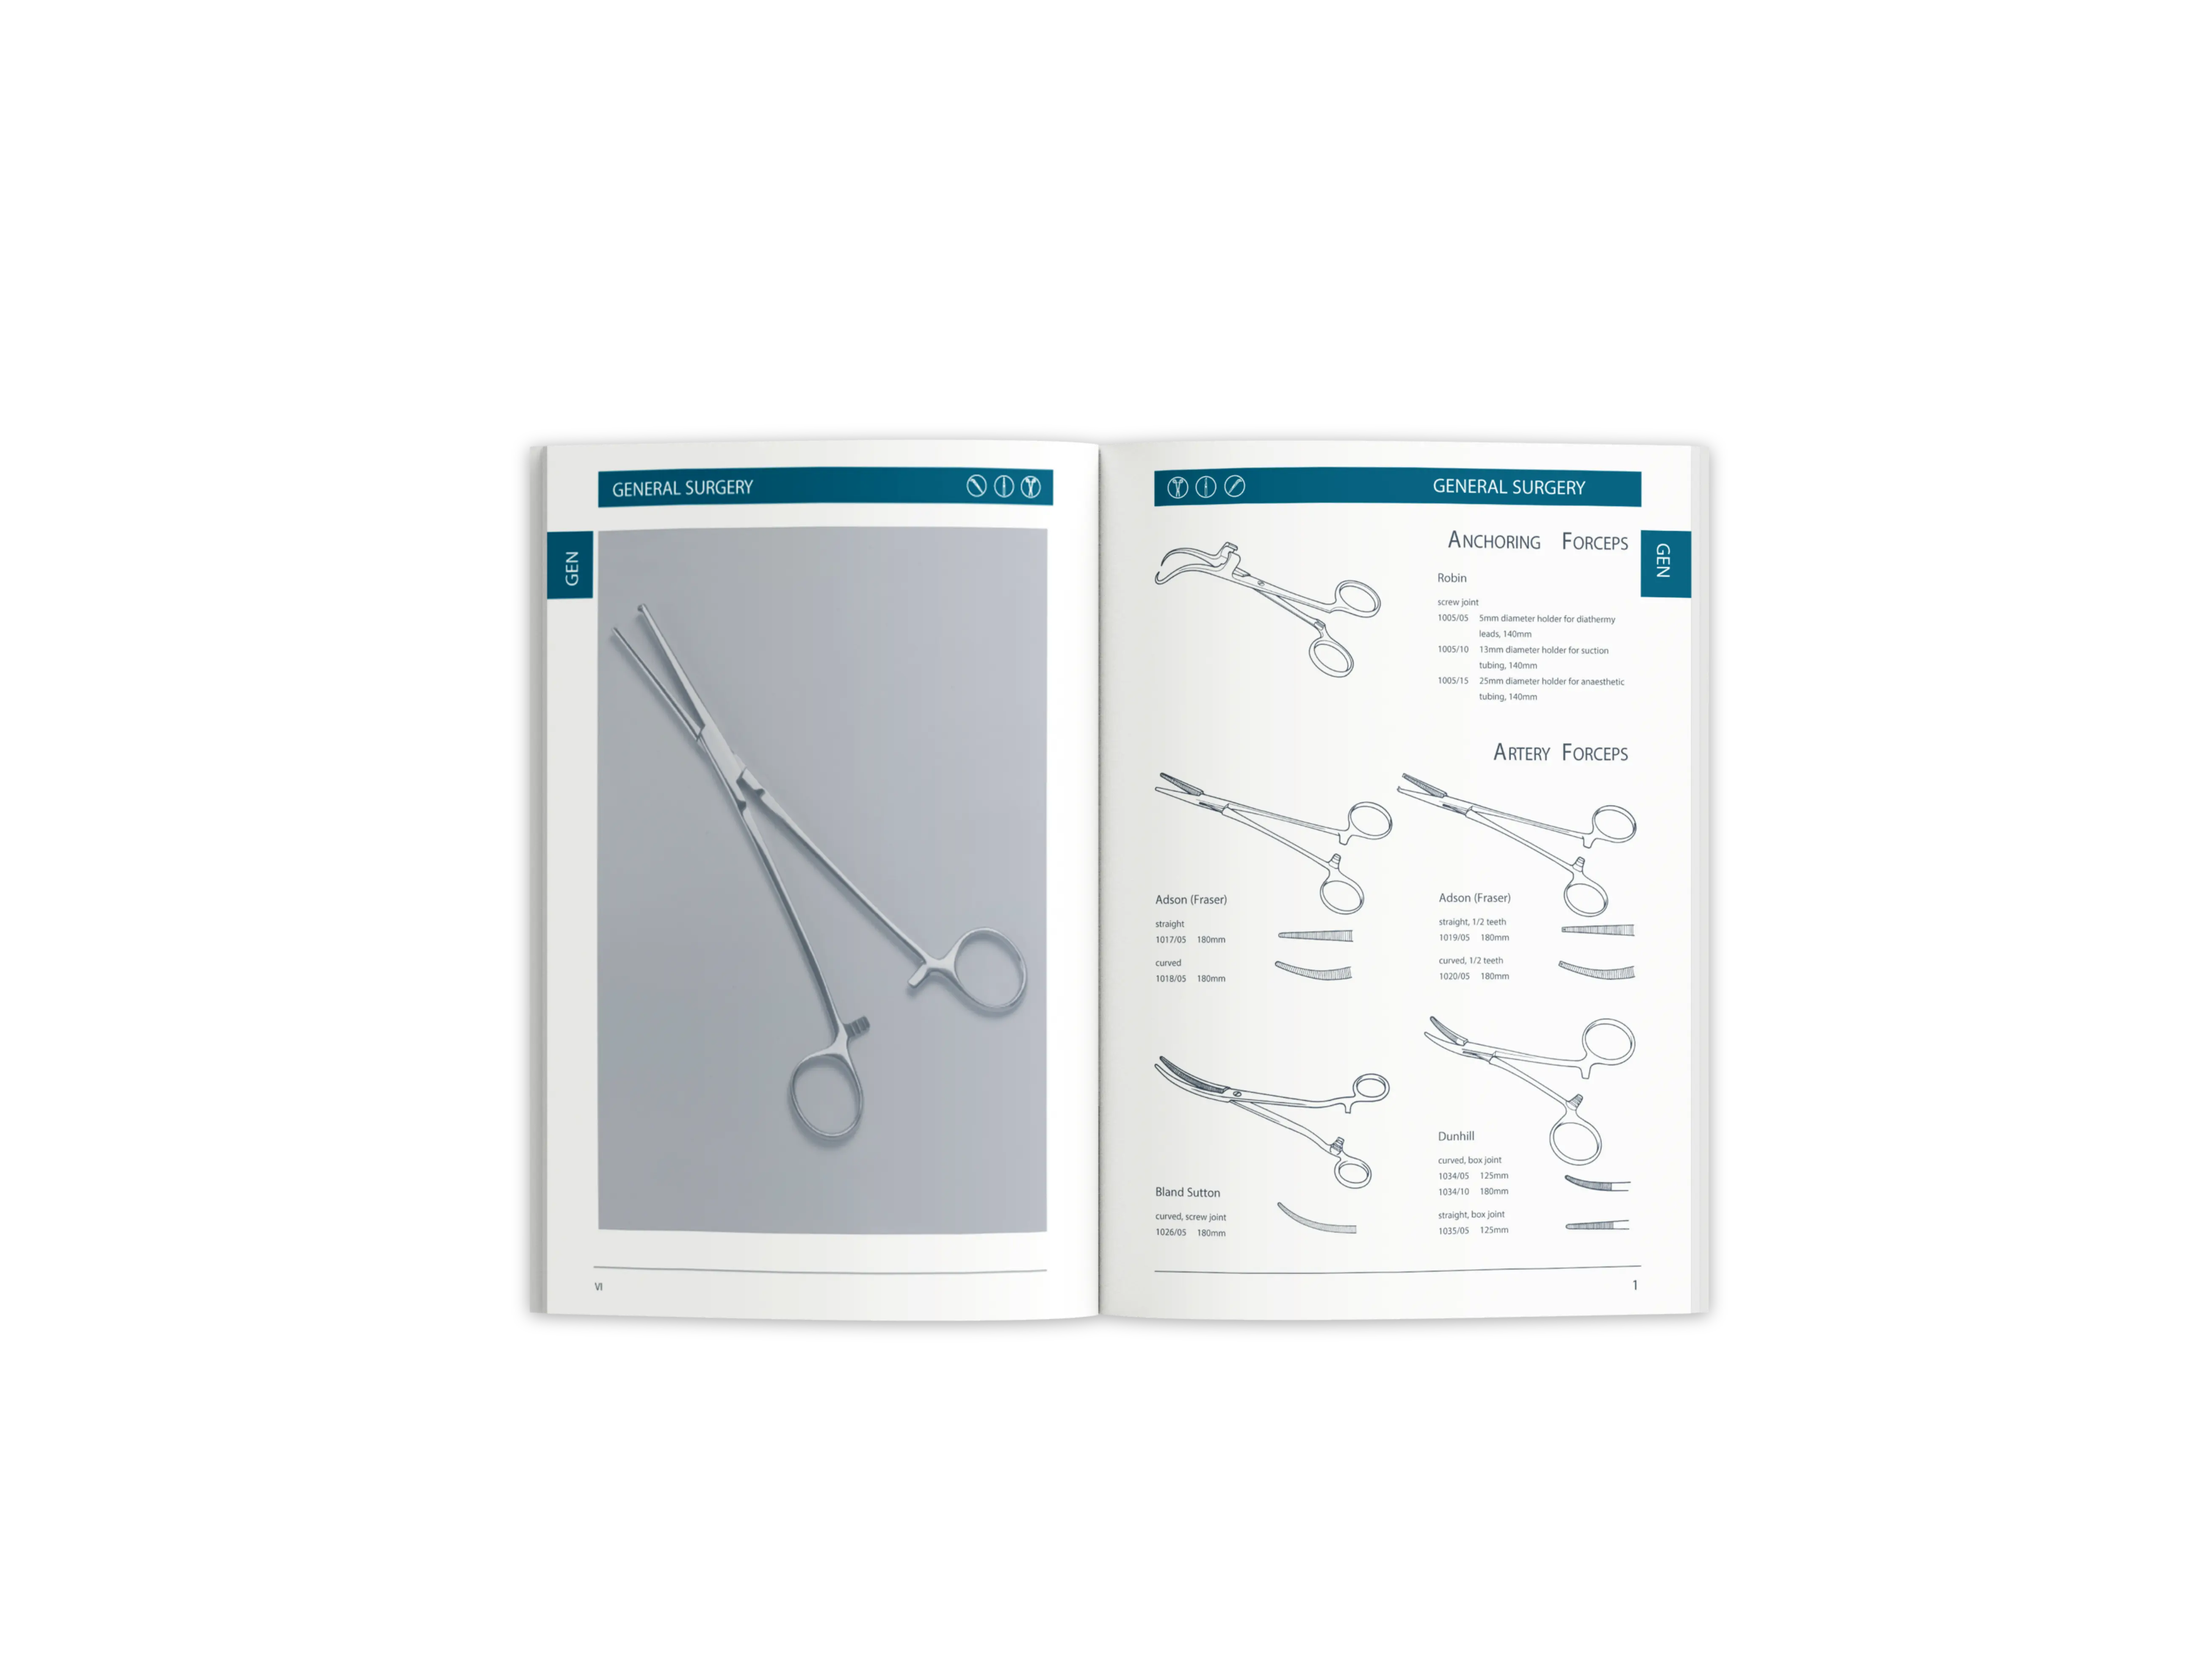 sychem surgical paper catalogue, opened showing products